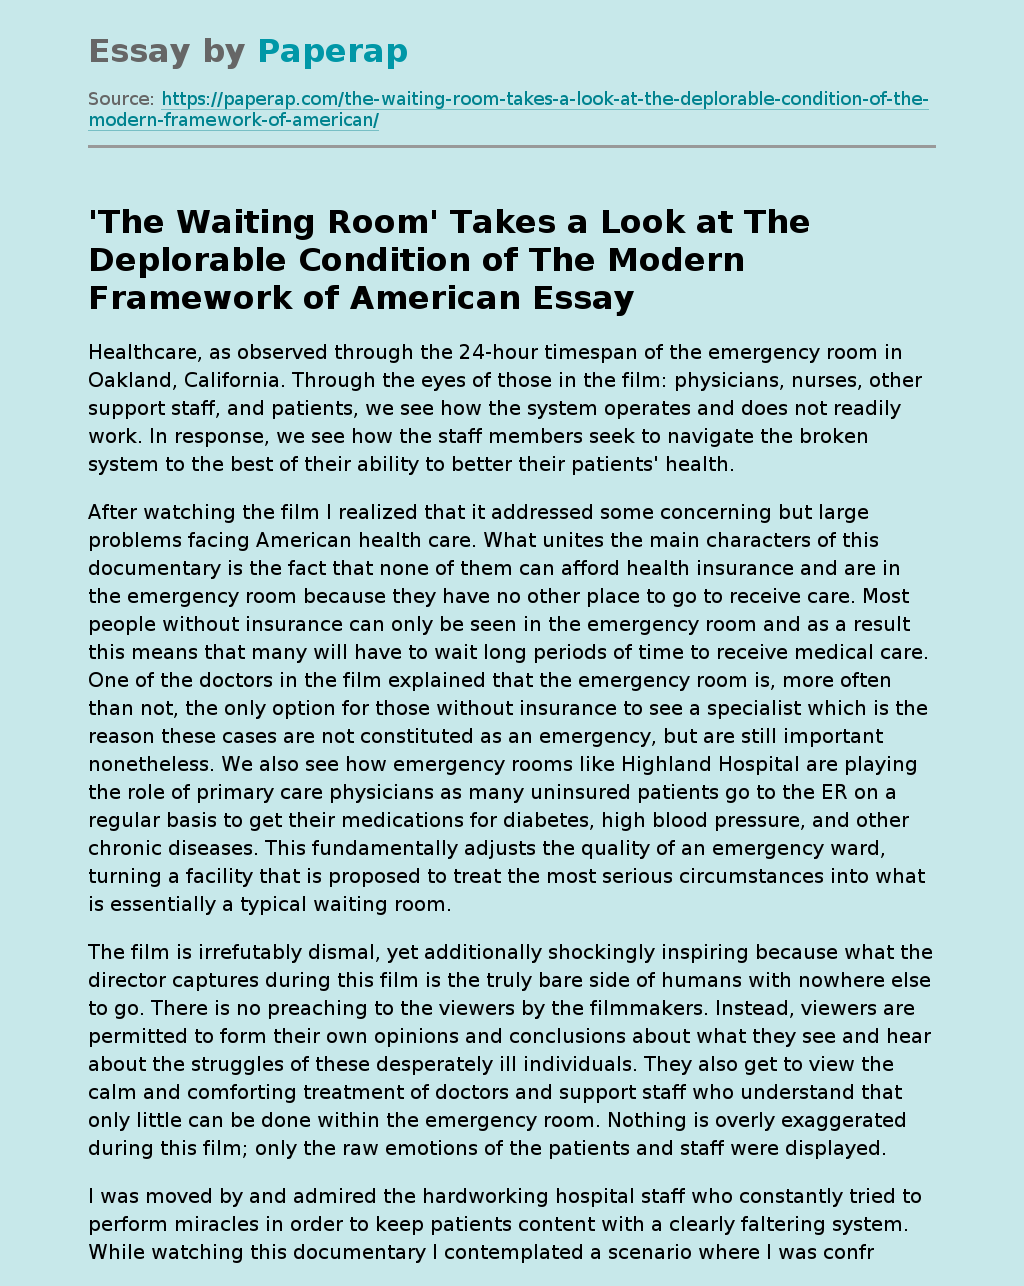 'The Waiting Room' Takes a Look at The Deplorable Condition of The Modern Framework of American